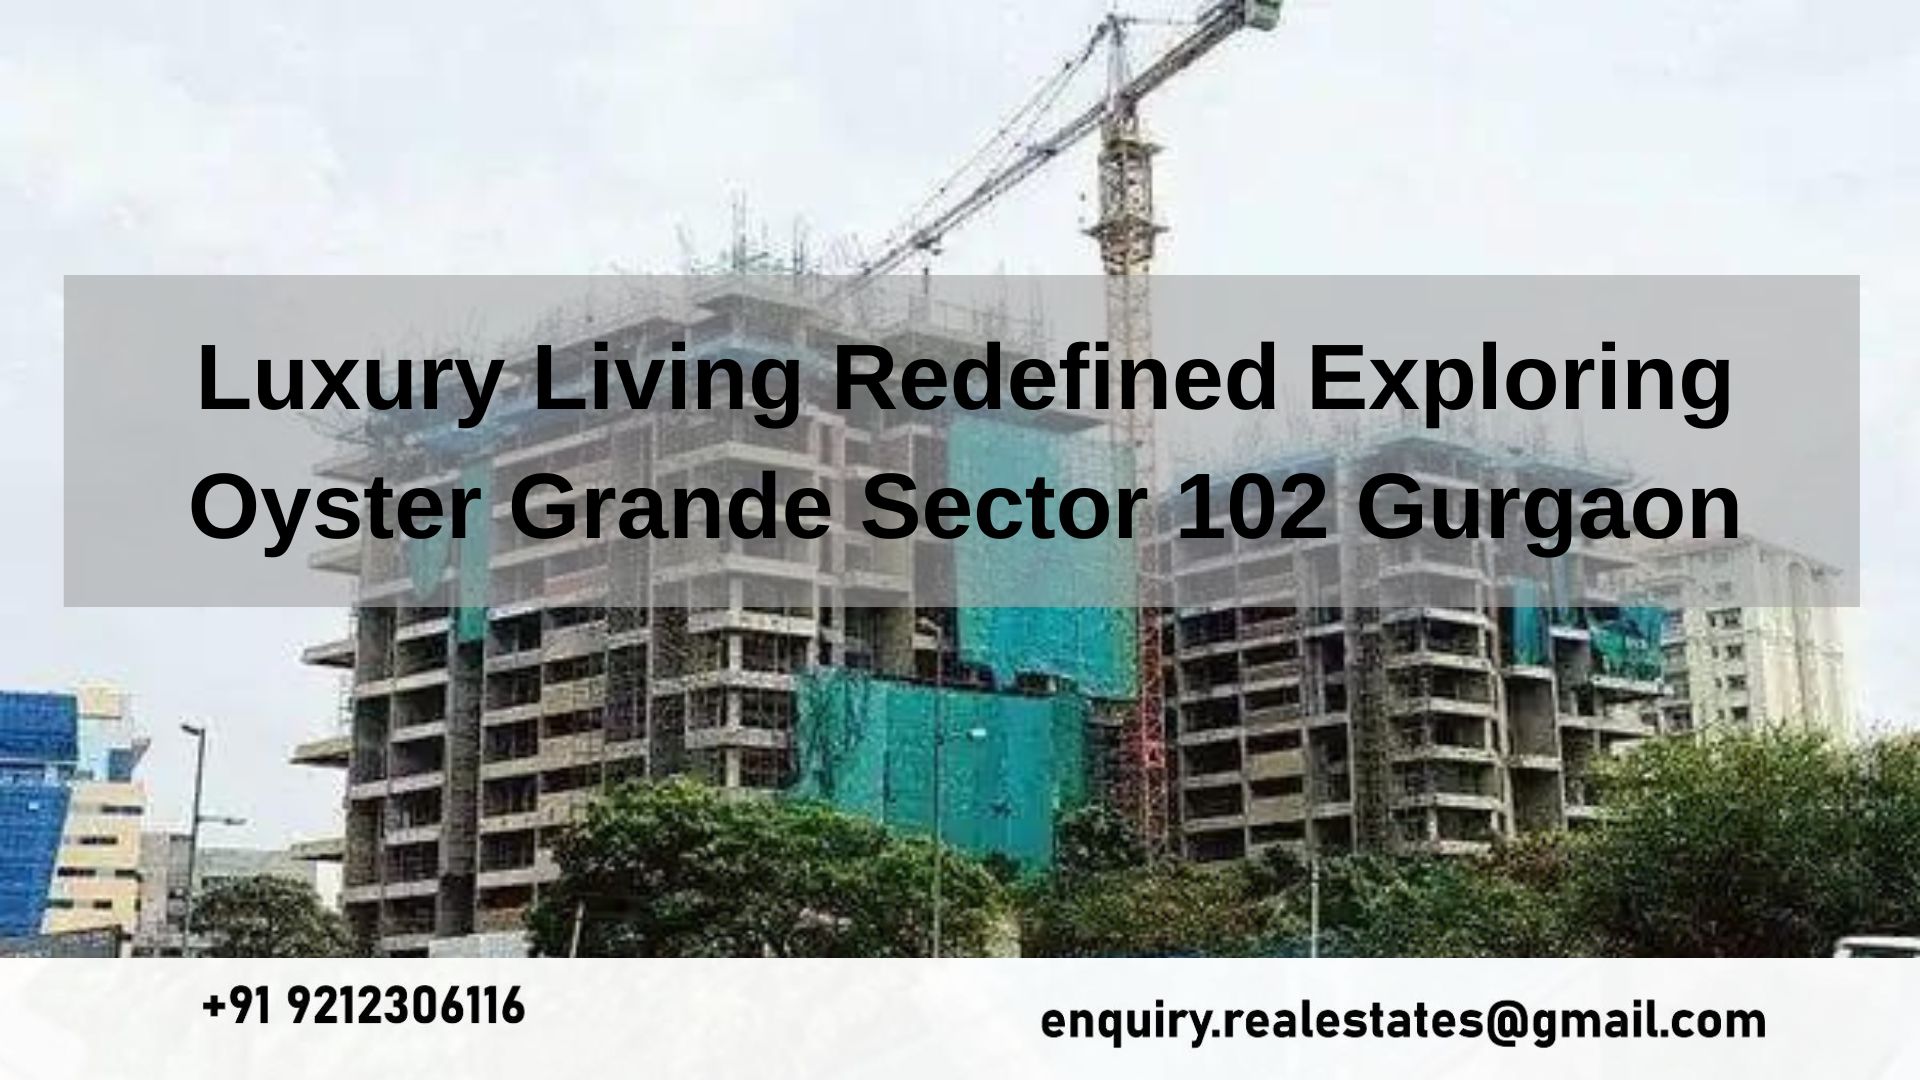 Luxury Living Redefined Exploring Oyster Grande Sector 102 Gurgaon